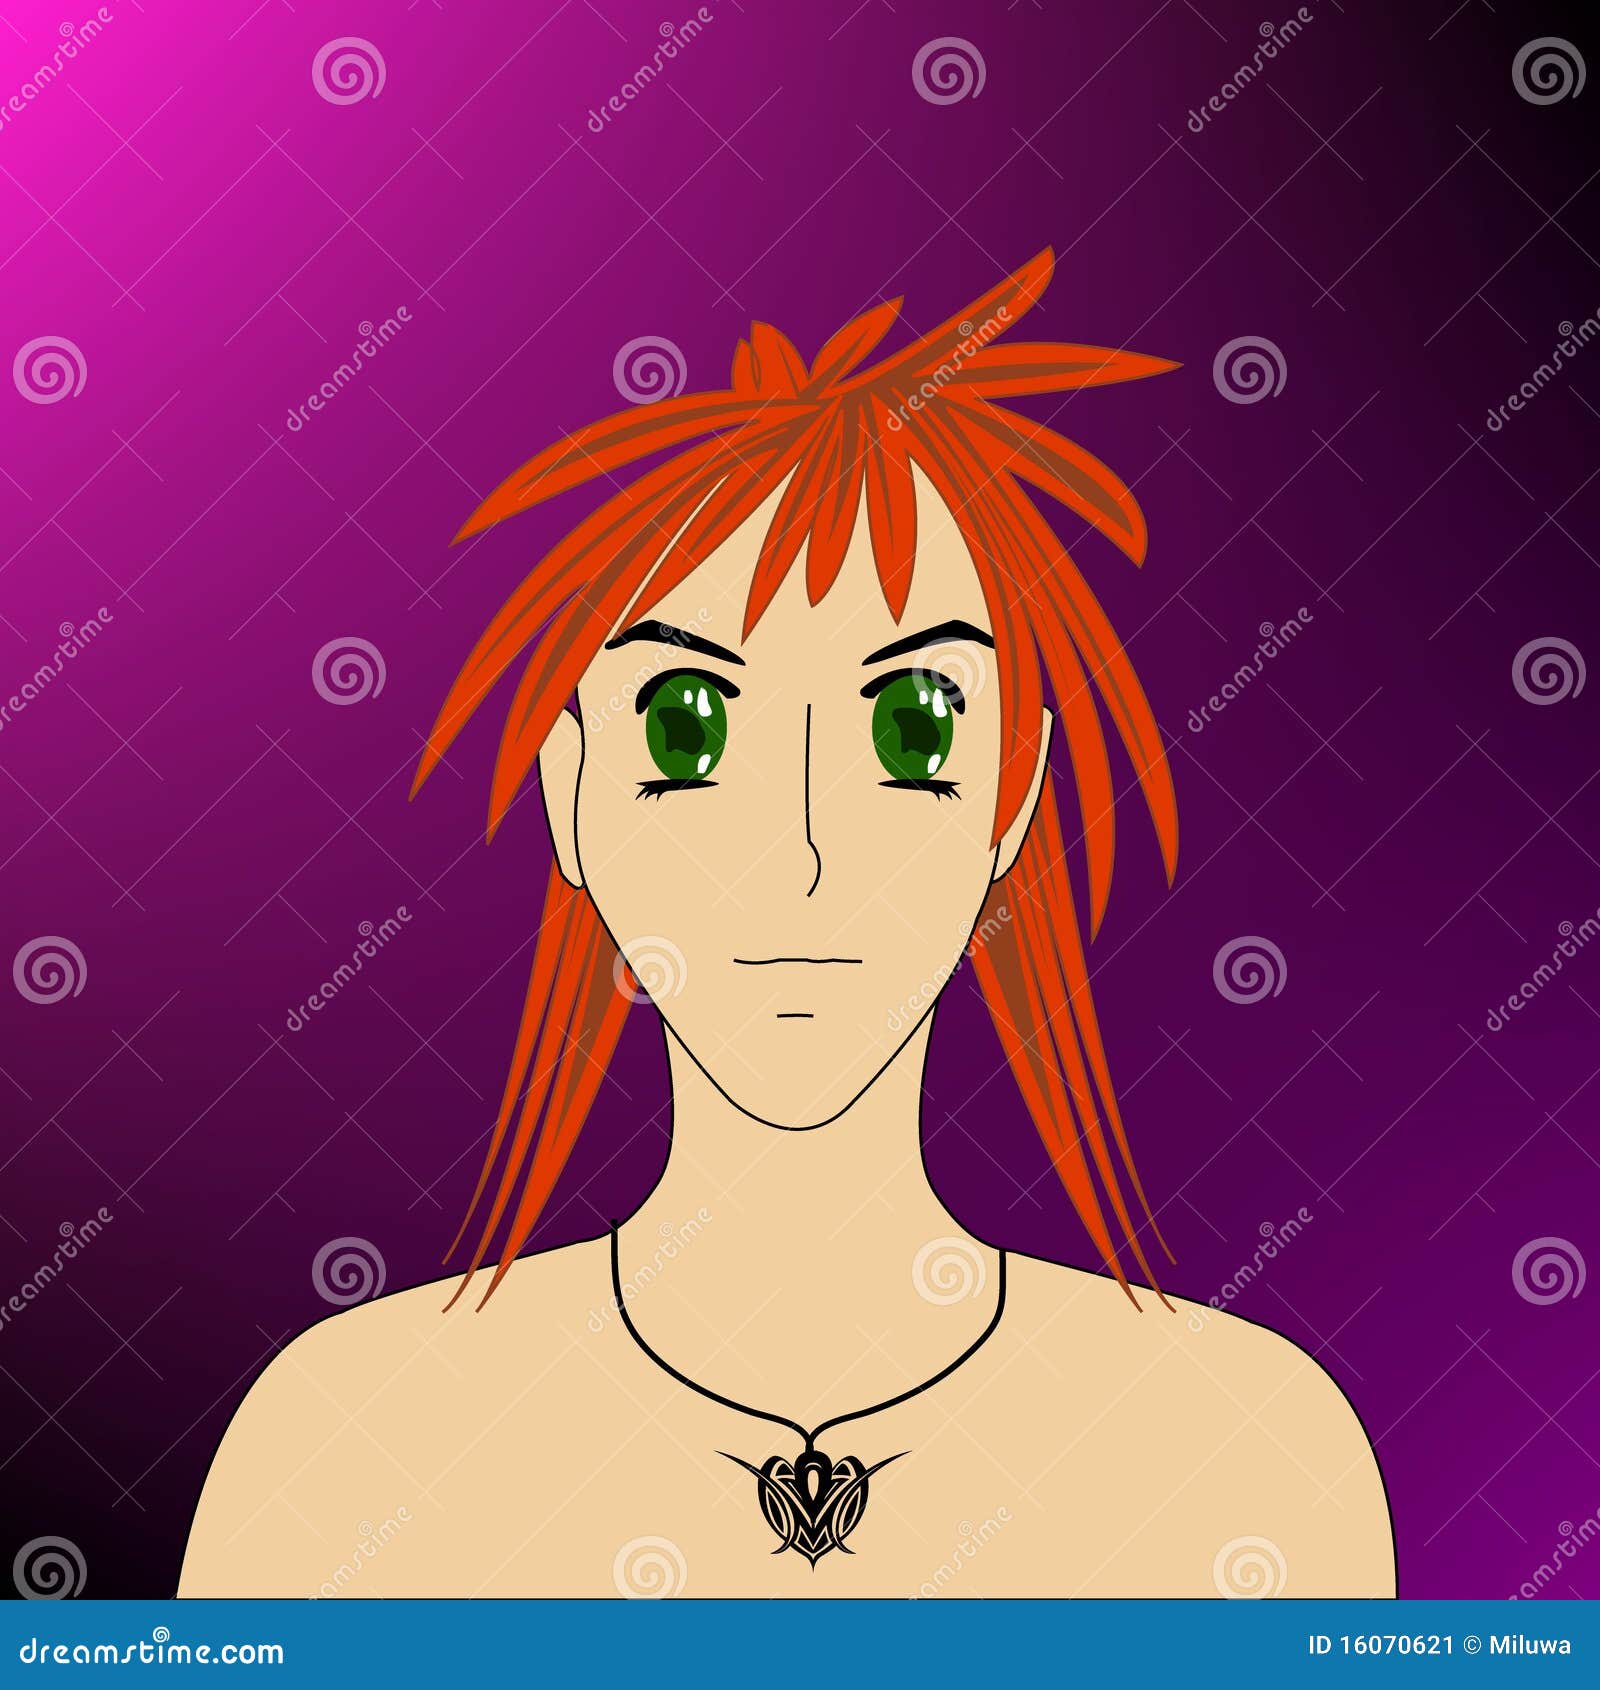 Anime avatar graphics Royalty Free Stock SVG Vector